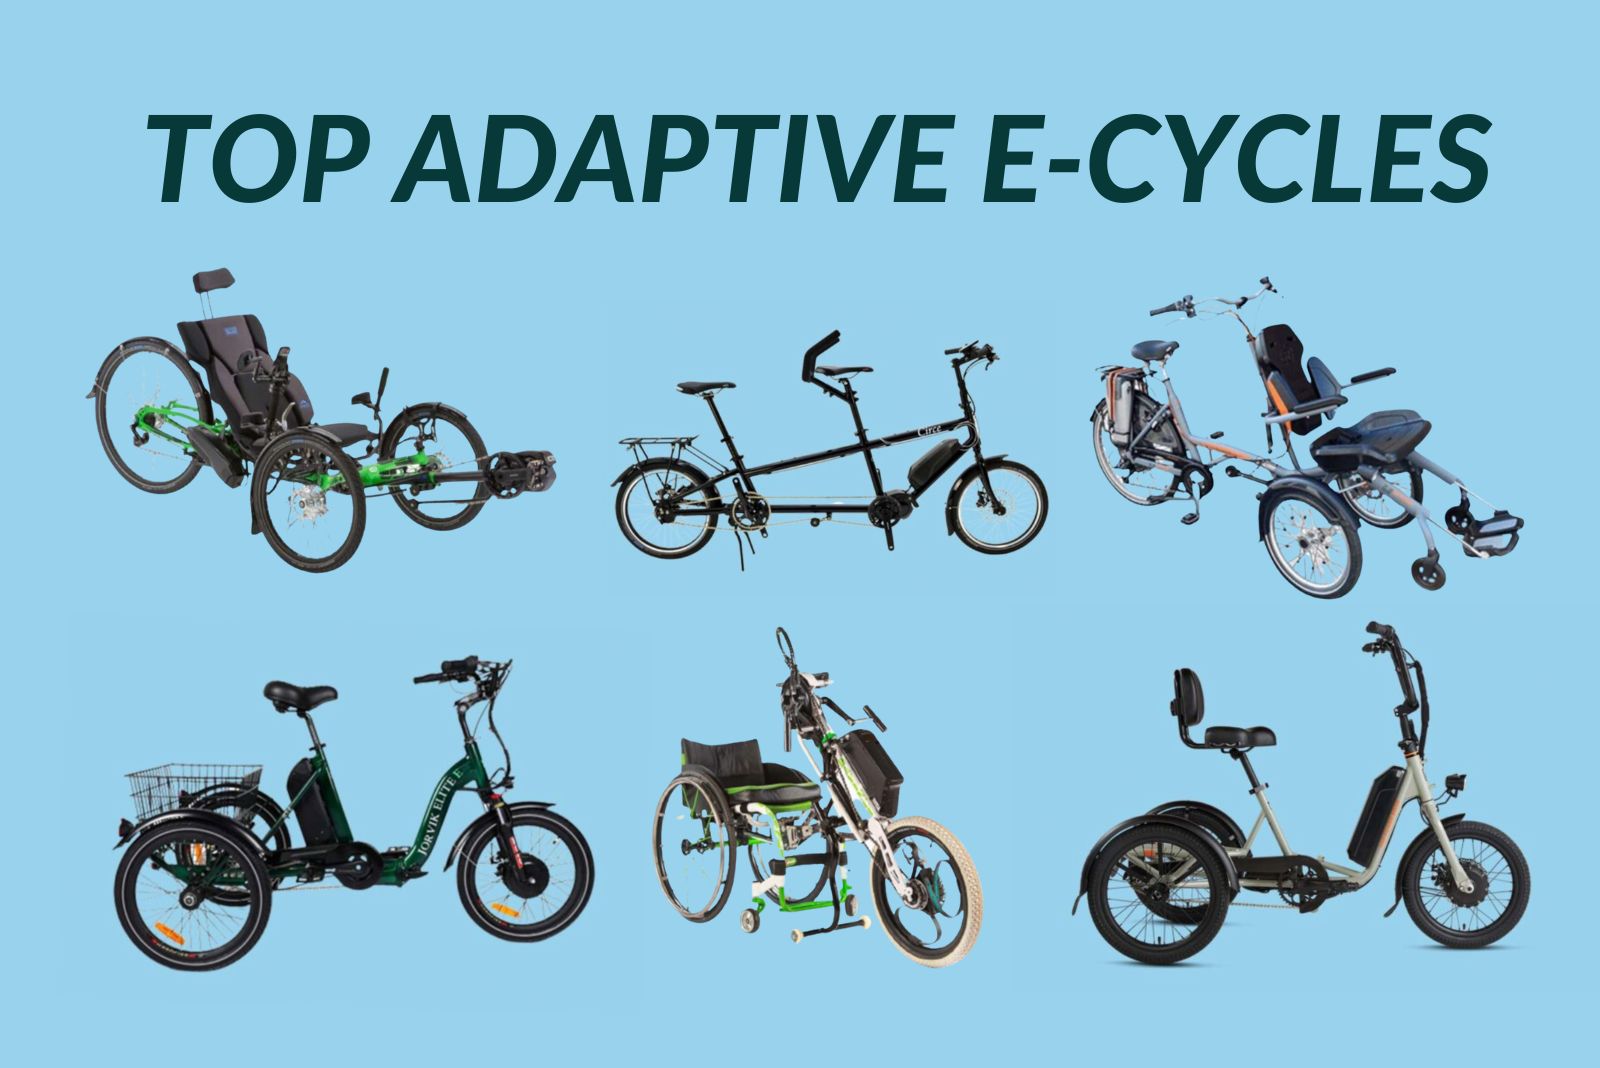 Are Folding E-Bikes suitable for people with limited mobility?